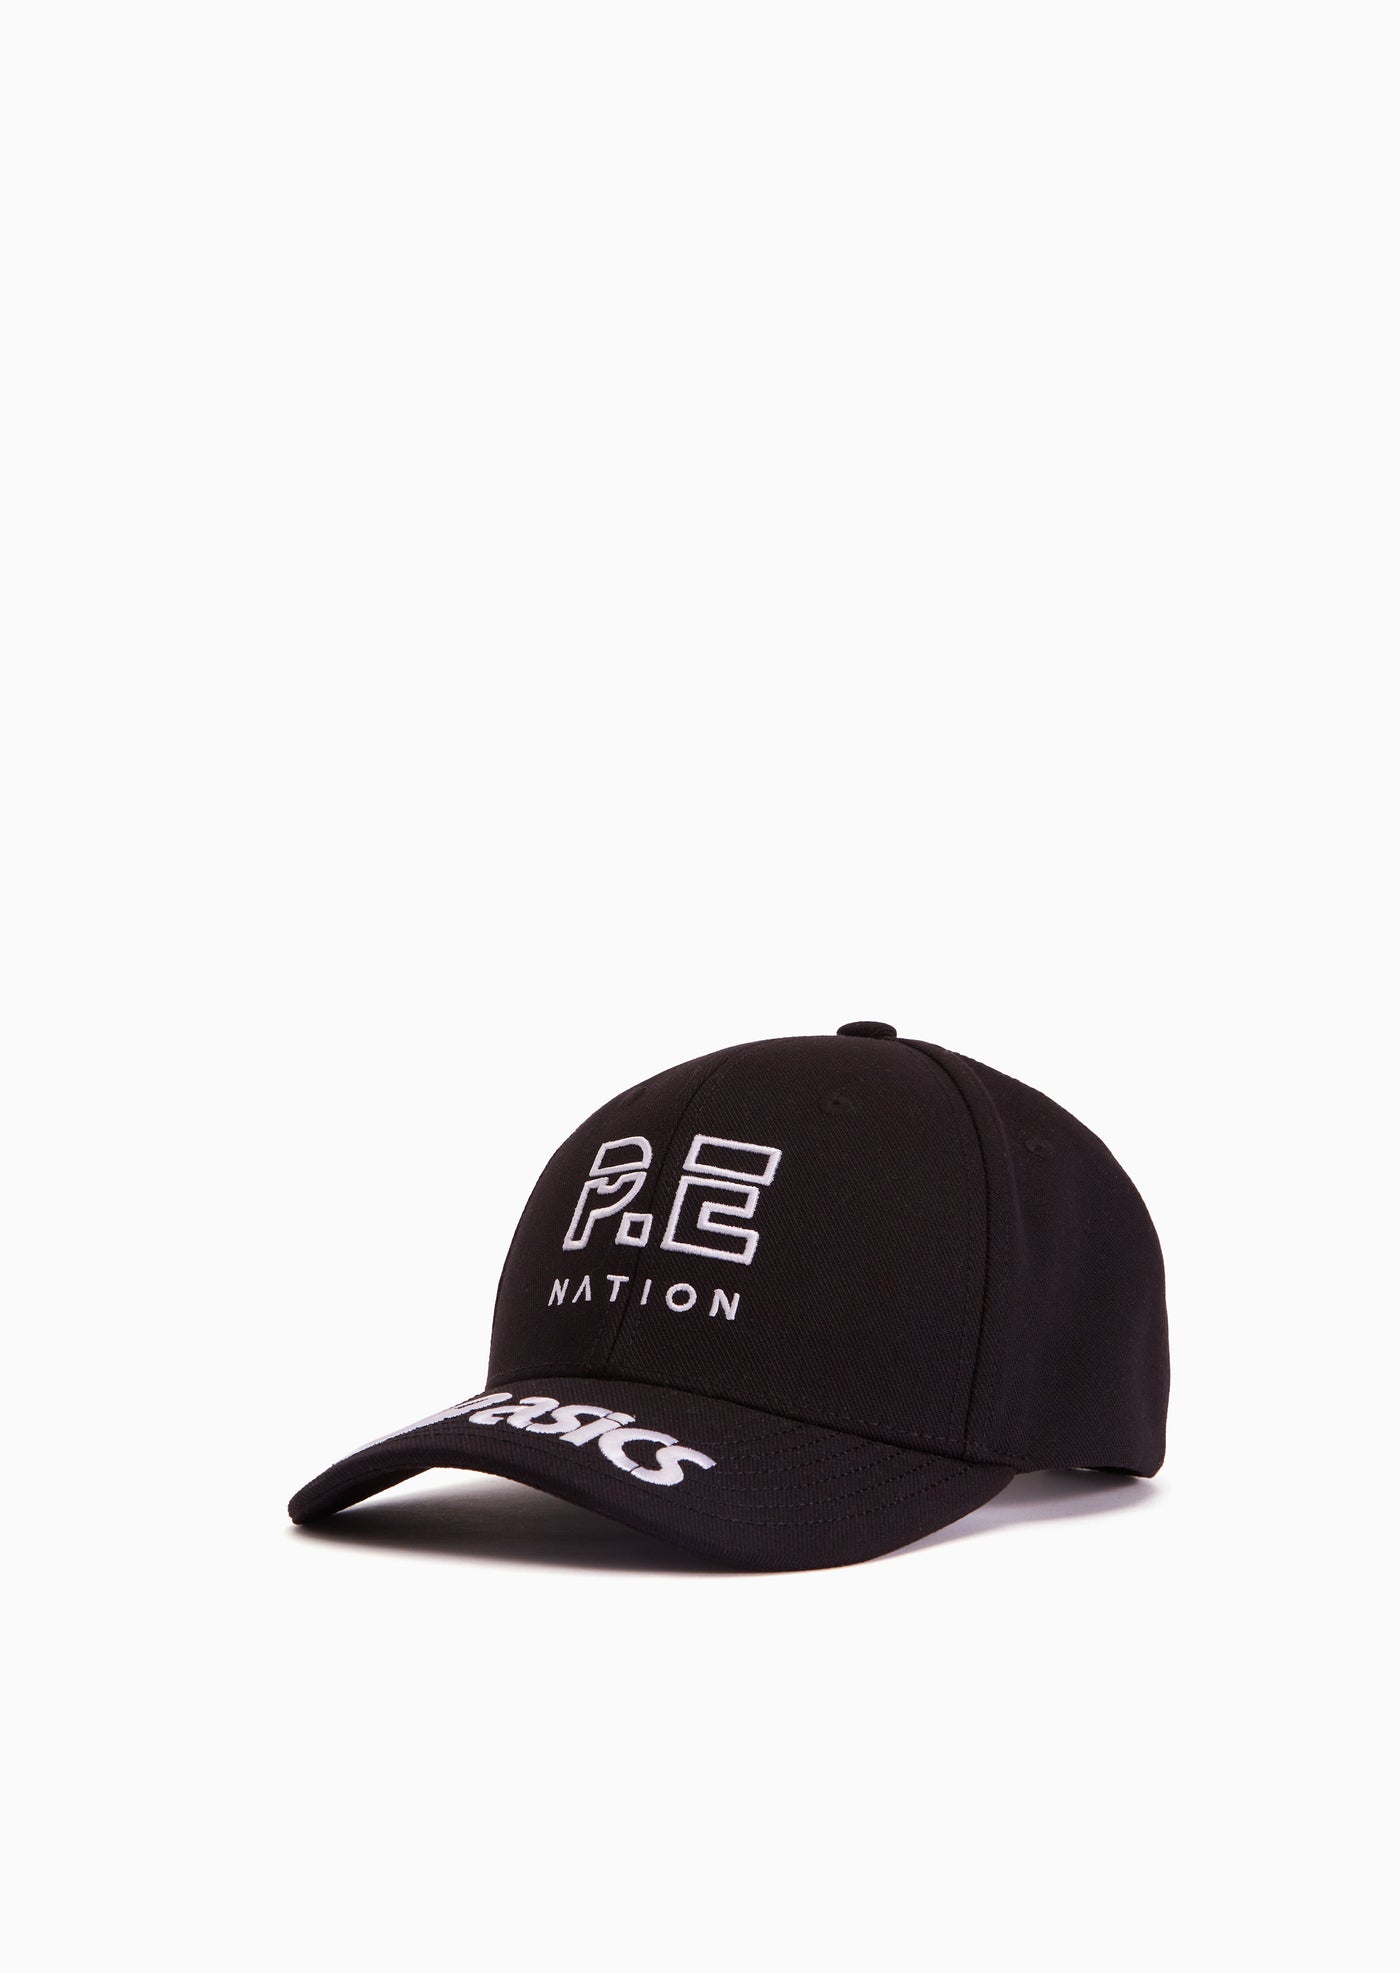 SEQUENCE CAP IN BLACK